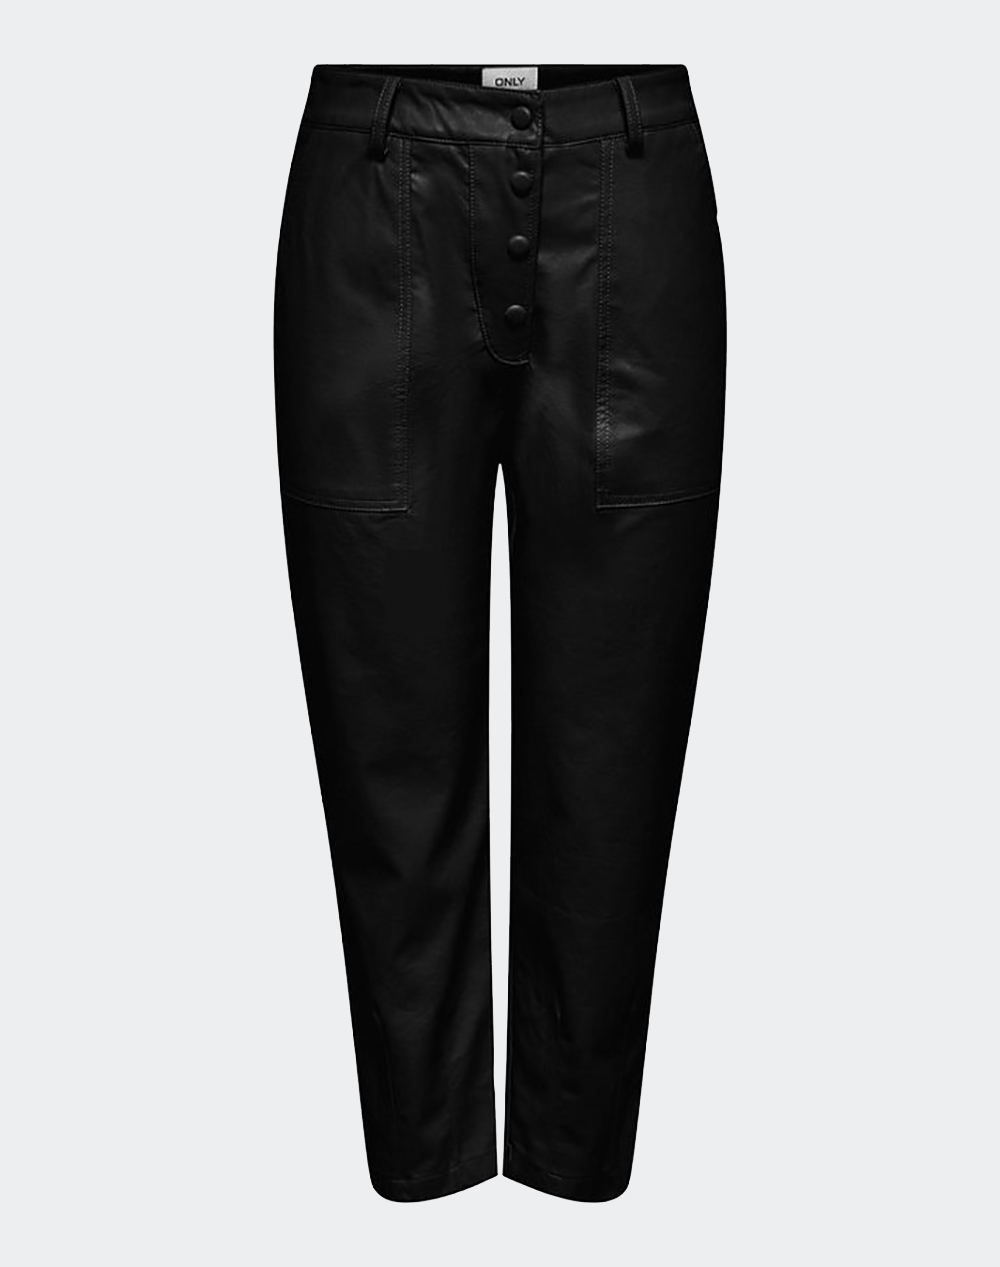 ONLY ΠΑΝΤΕΛΟΝΙ ONLCAMILA HW FAUX LEATHER PANT CC PNT 15263558-BLACK Black 3510AONLY2000039_2813